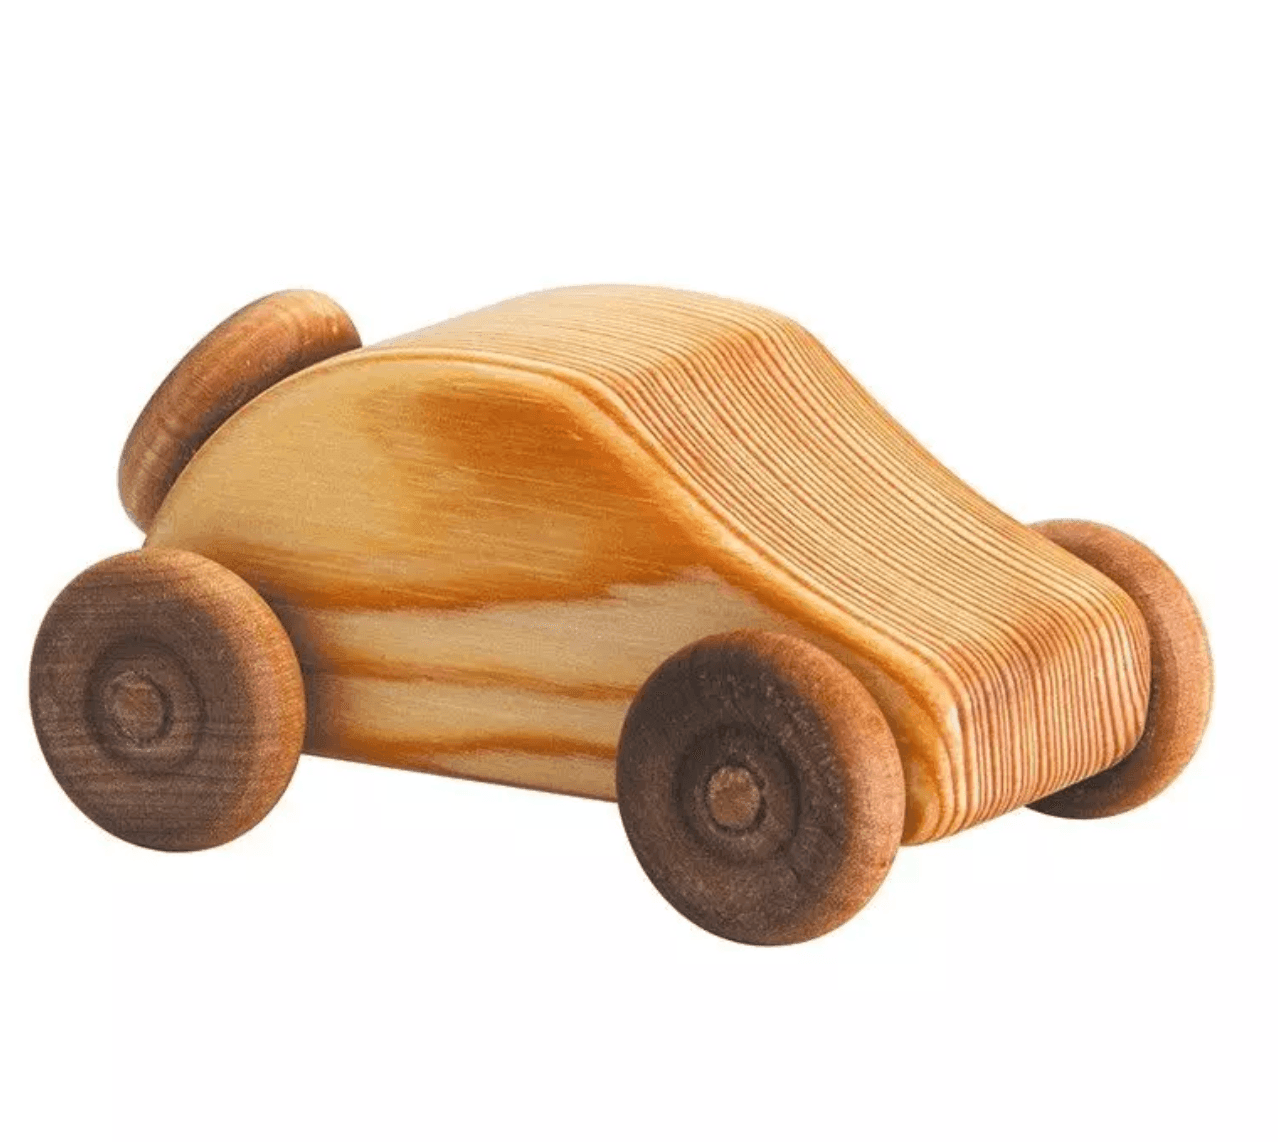 Debresk - Wooden Toy Ragtop Car Small - Why and Whale